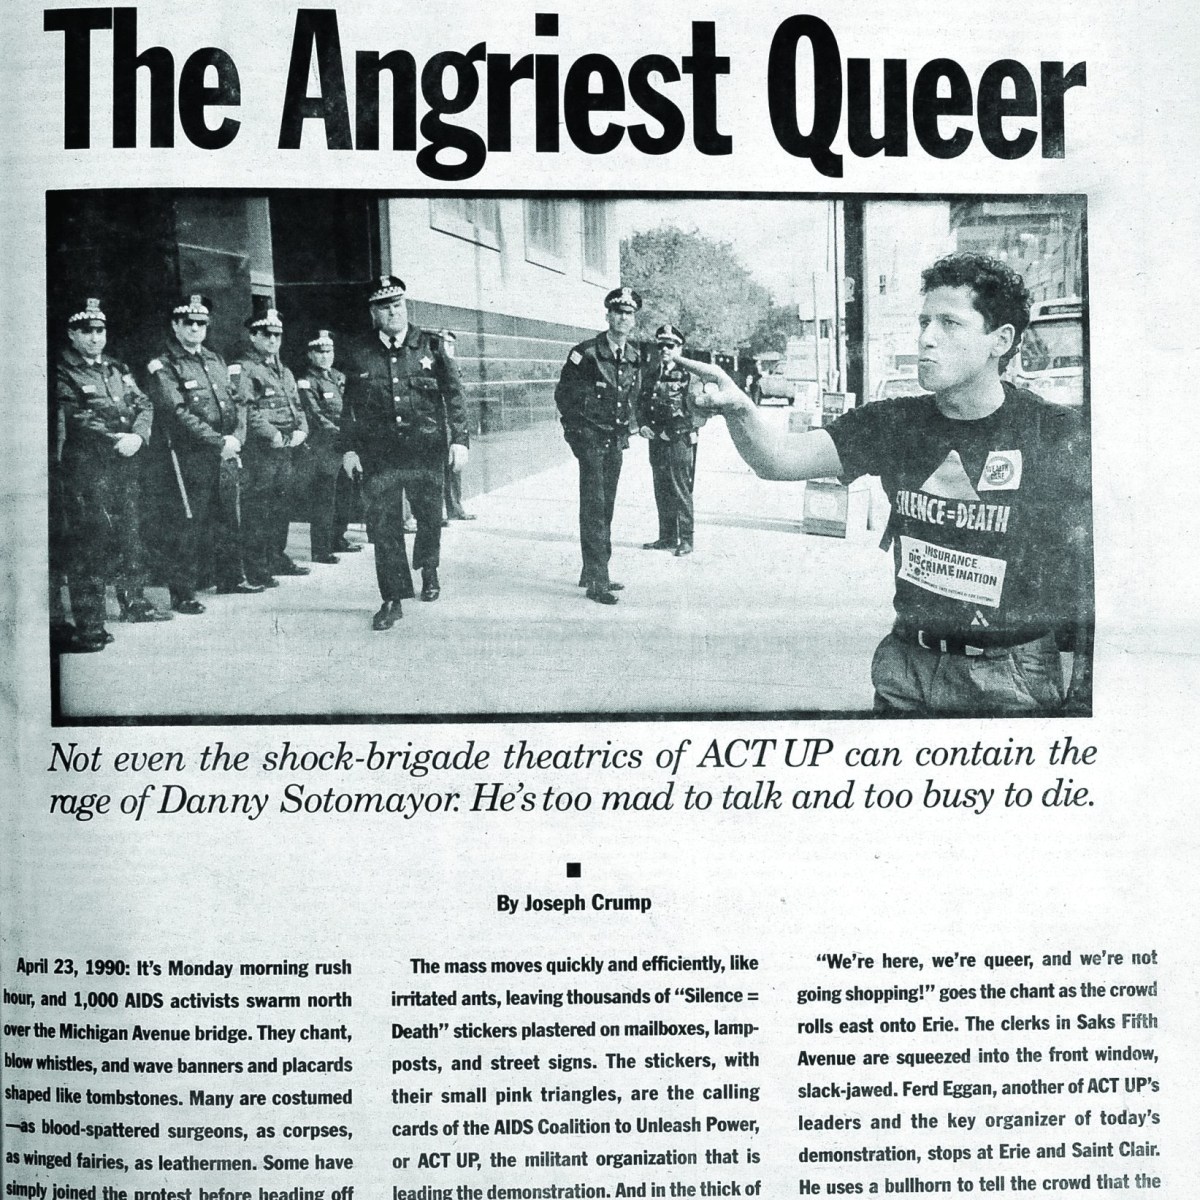 Queer history through the eyes of the Reader